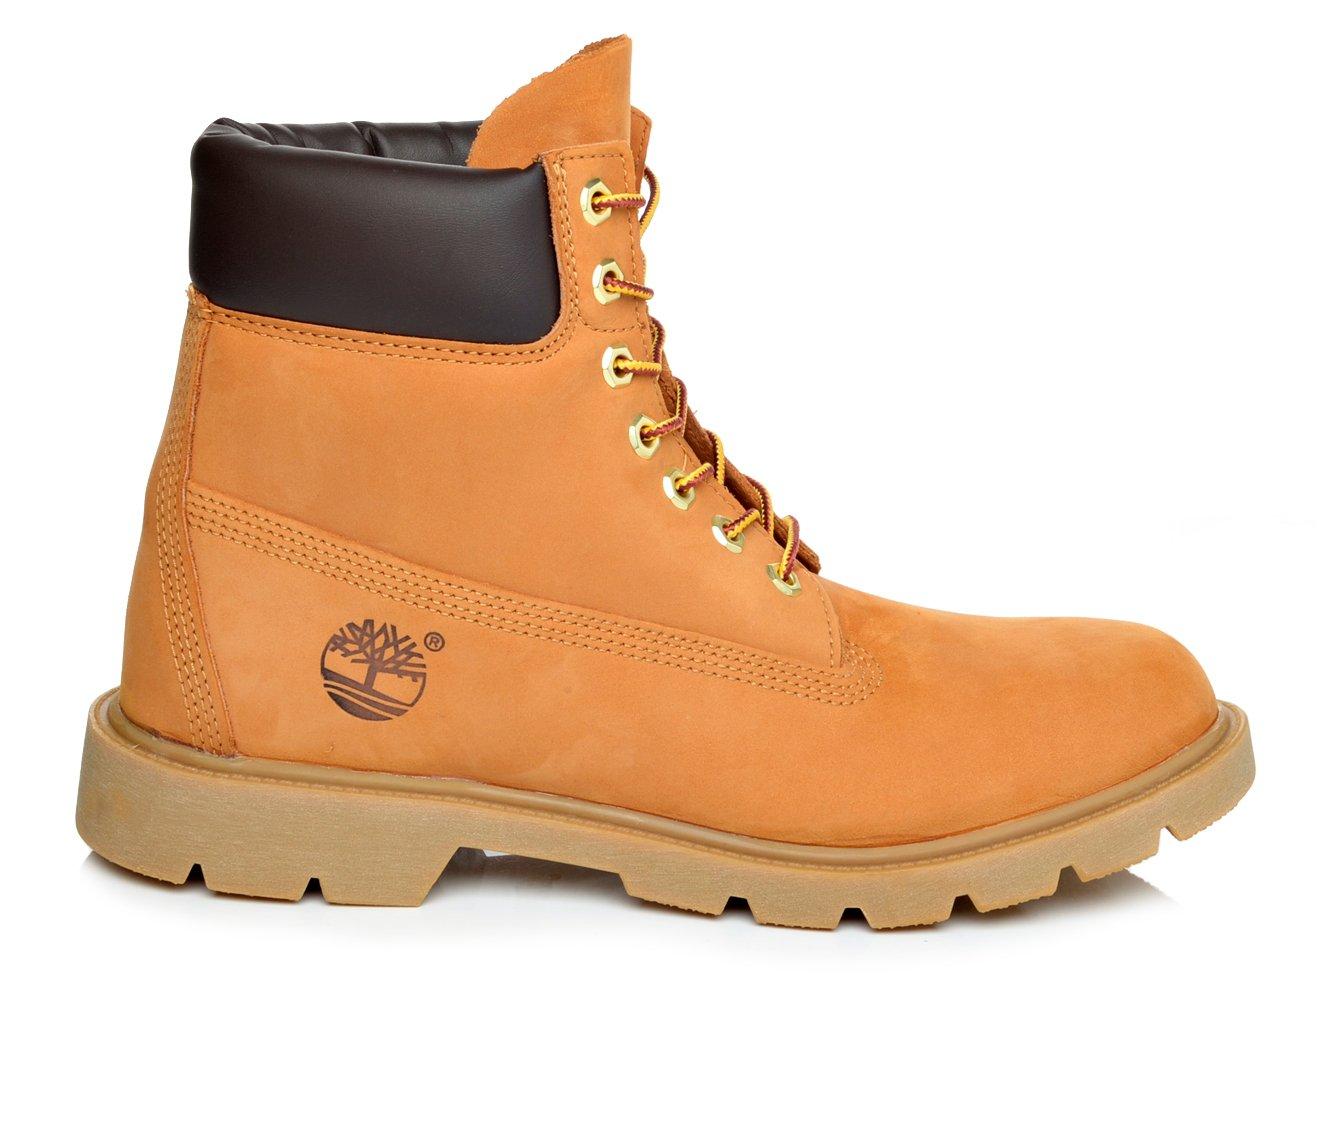 Men's Timberland Wide Width Boots and Shoes Shoe Carnival